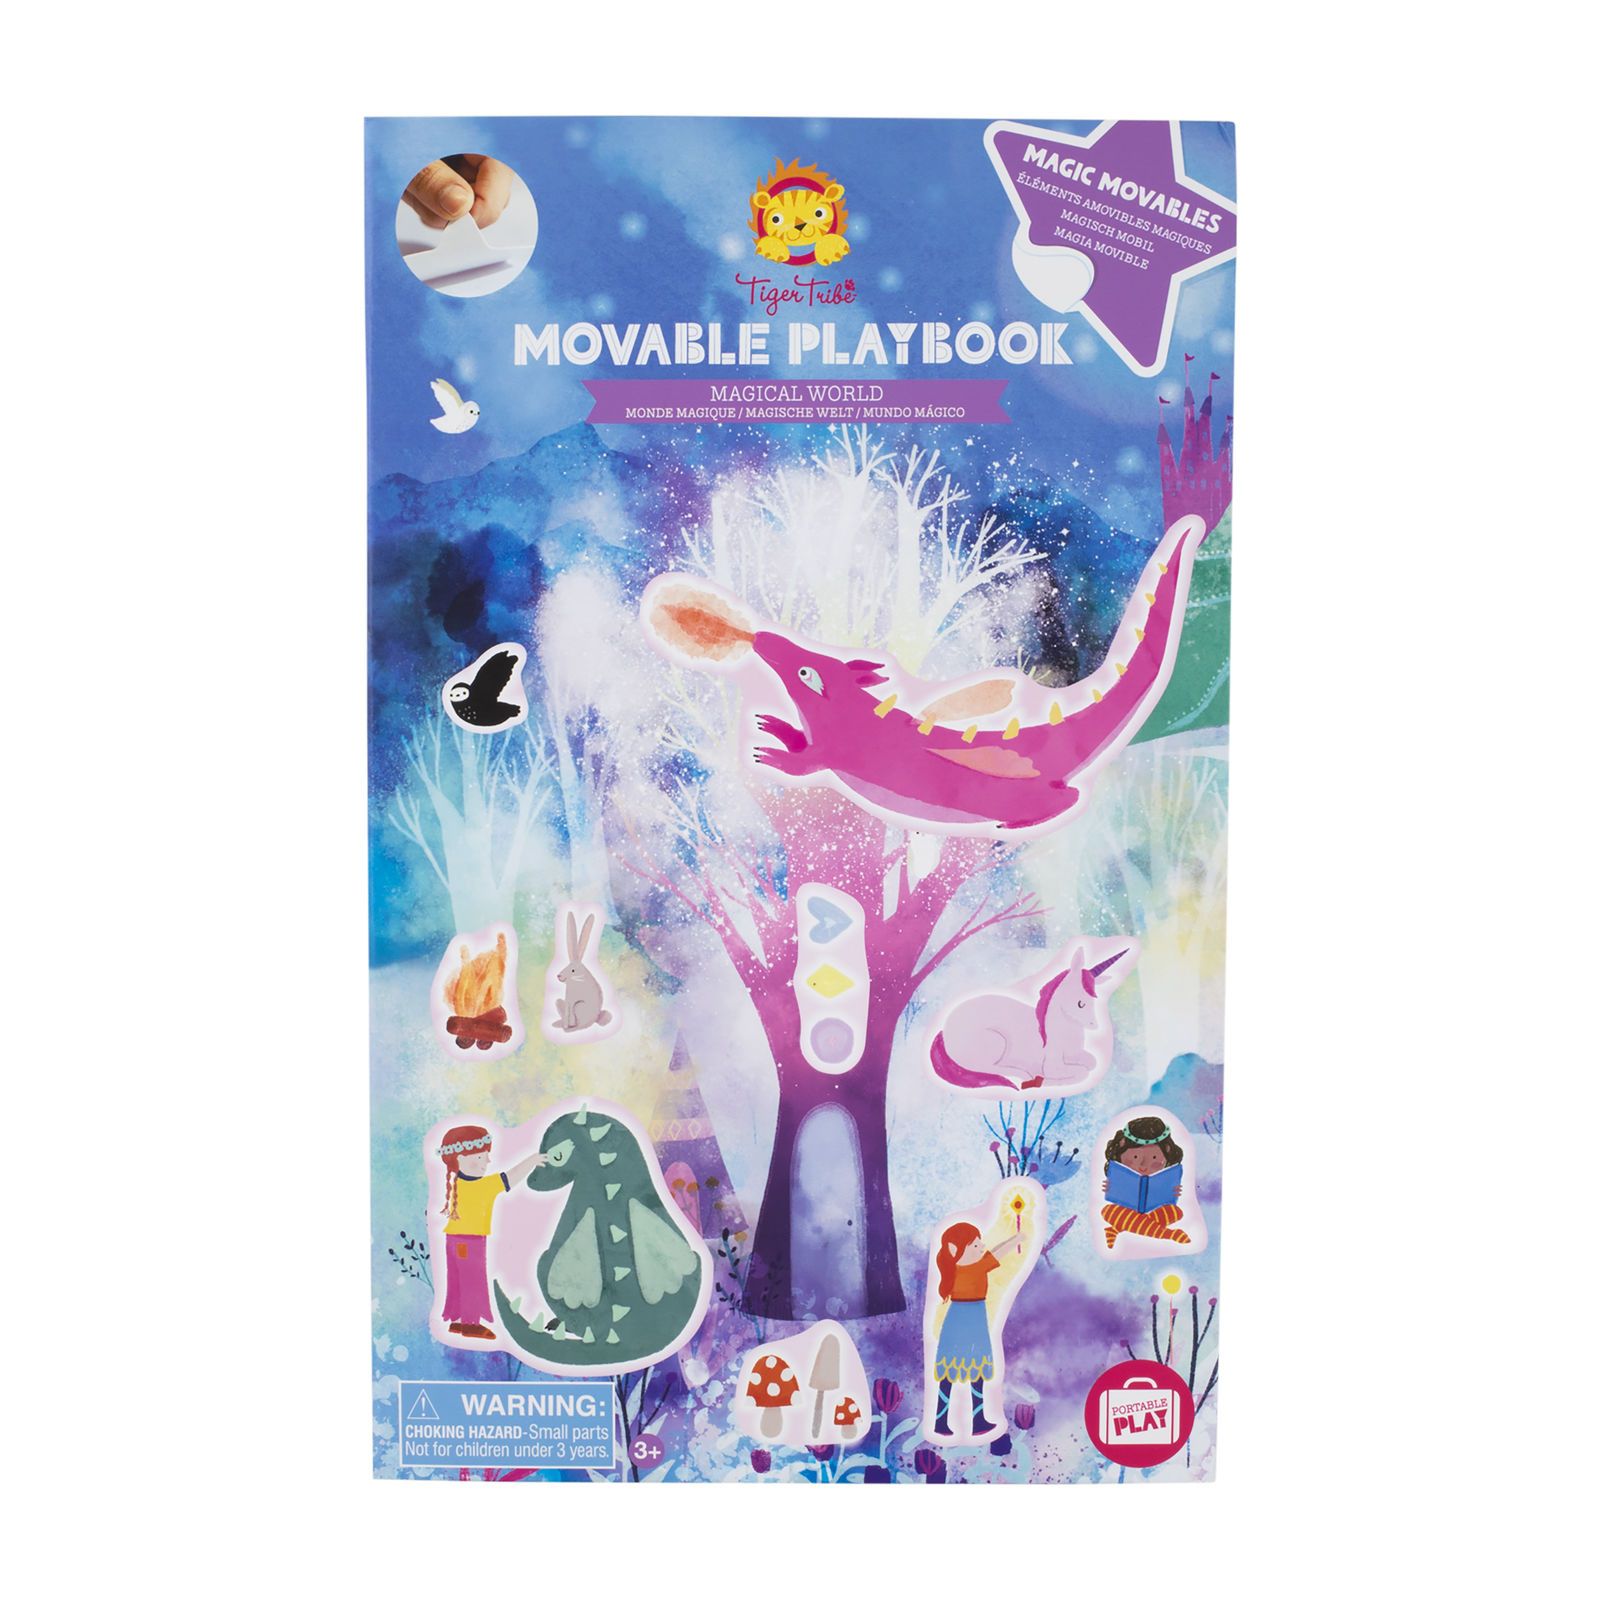 Movable Playbook (Magical World)